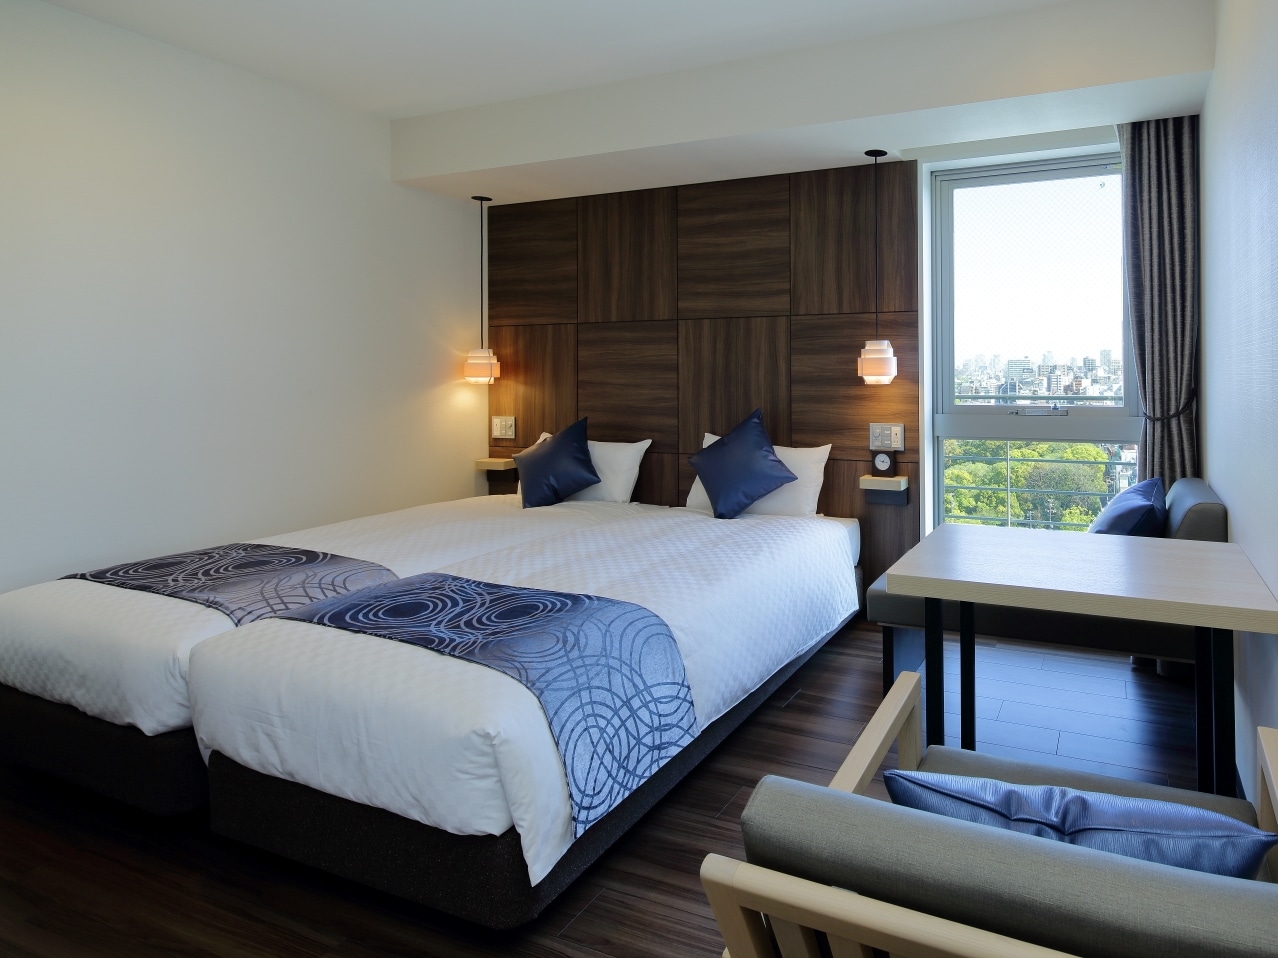 Twin room: 20㎡, equipped with an air purifier with plasma cluster